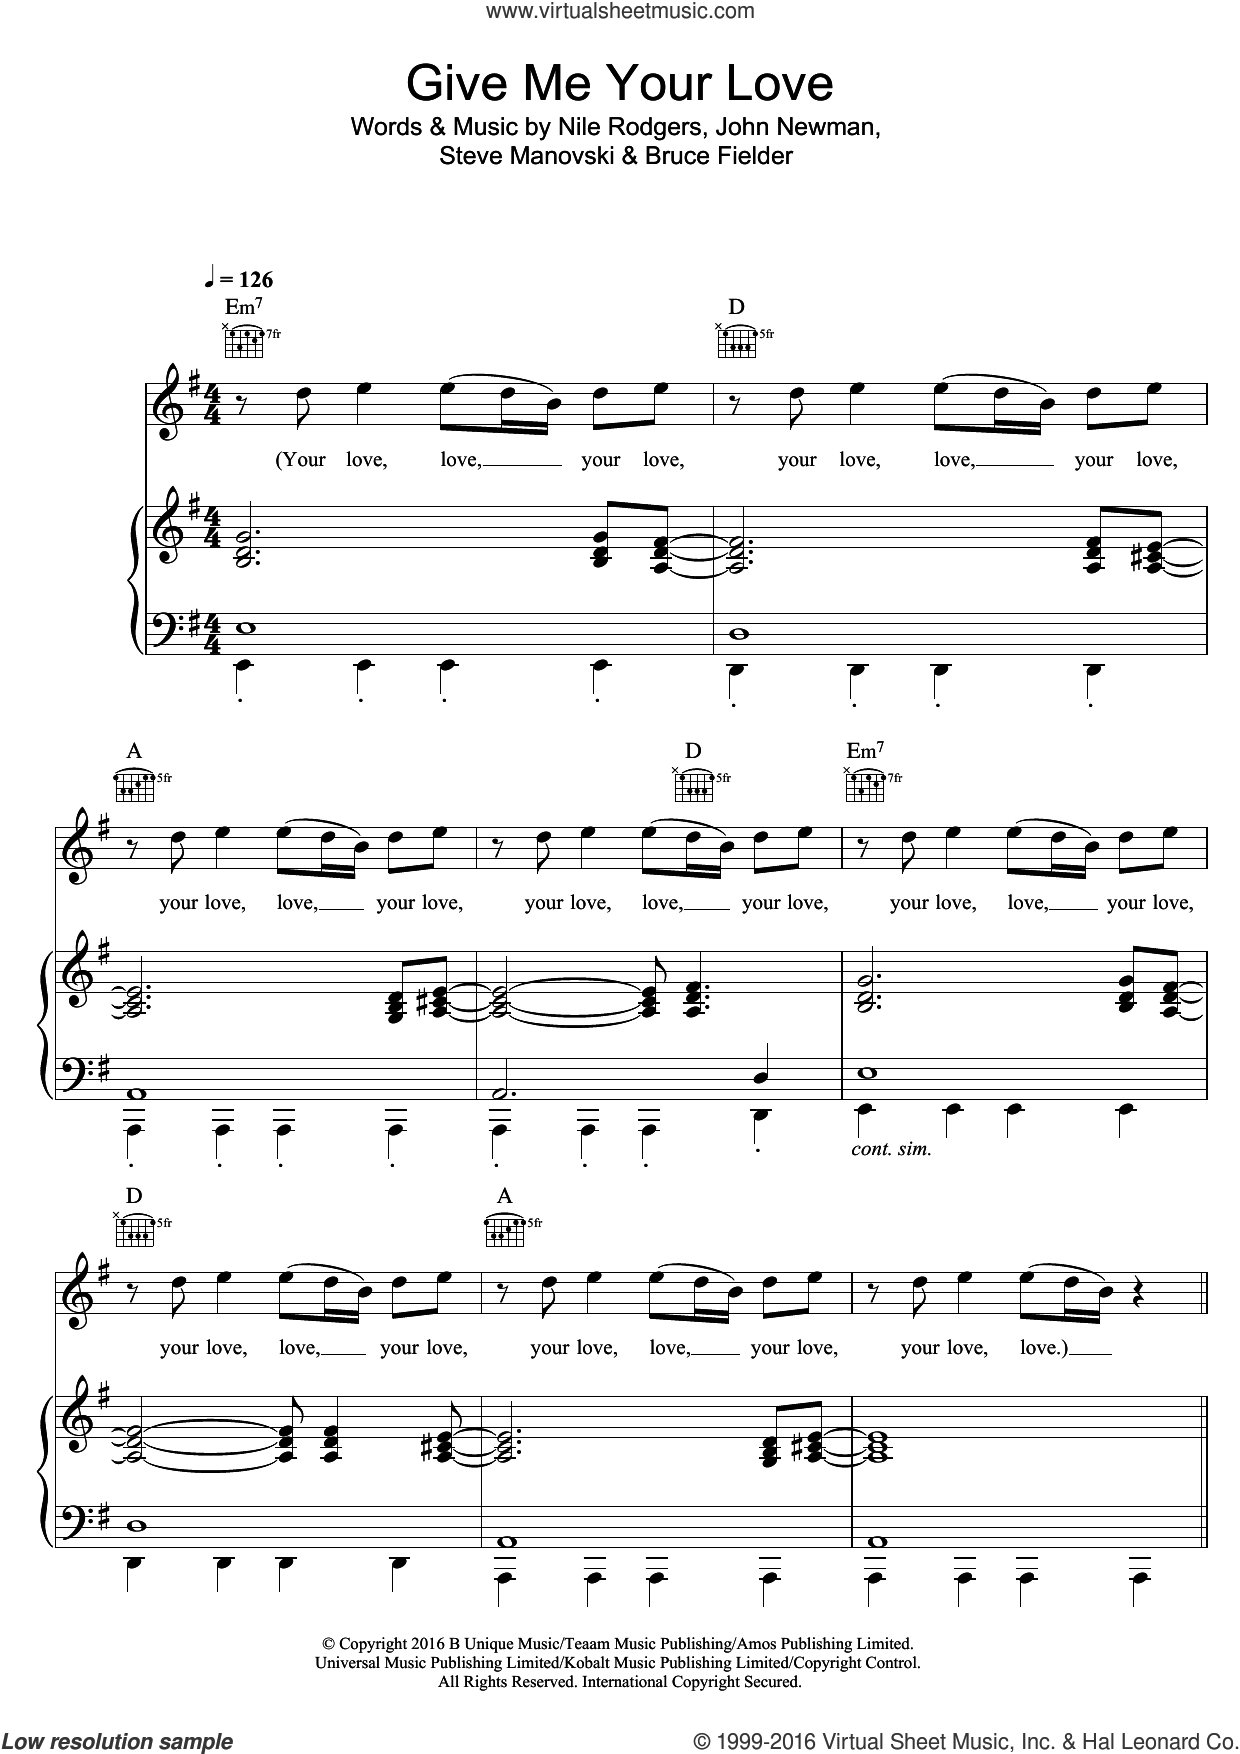 Sigala - Give Me Your Love (featuring John Newman and Nile Rodgers) sheet music for voice, piano ...